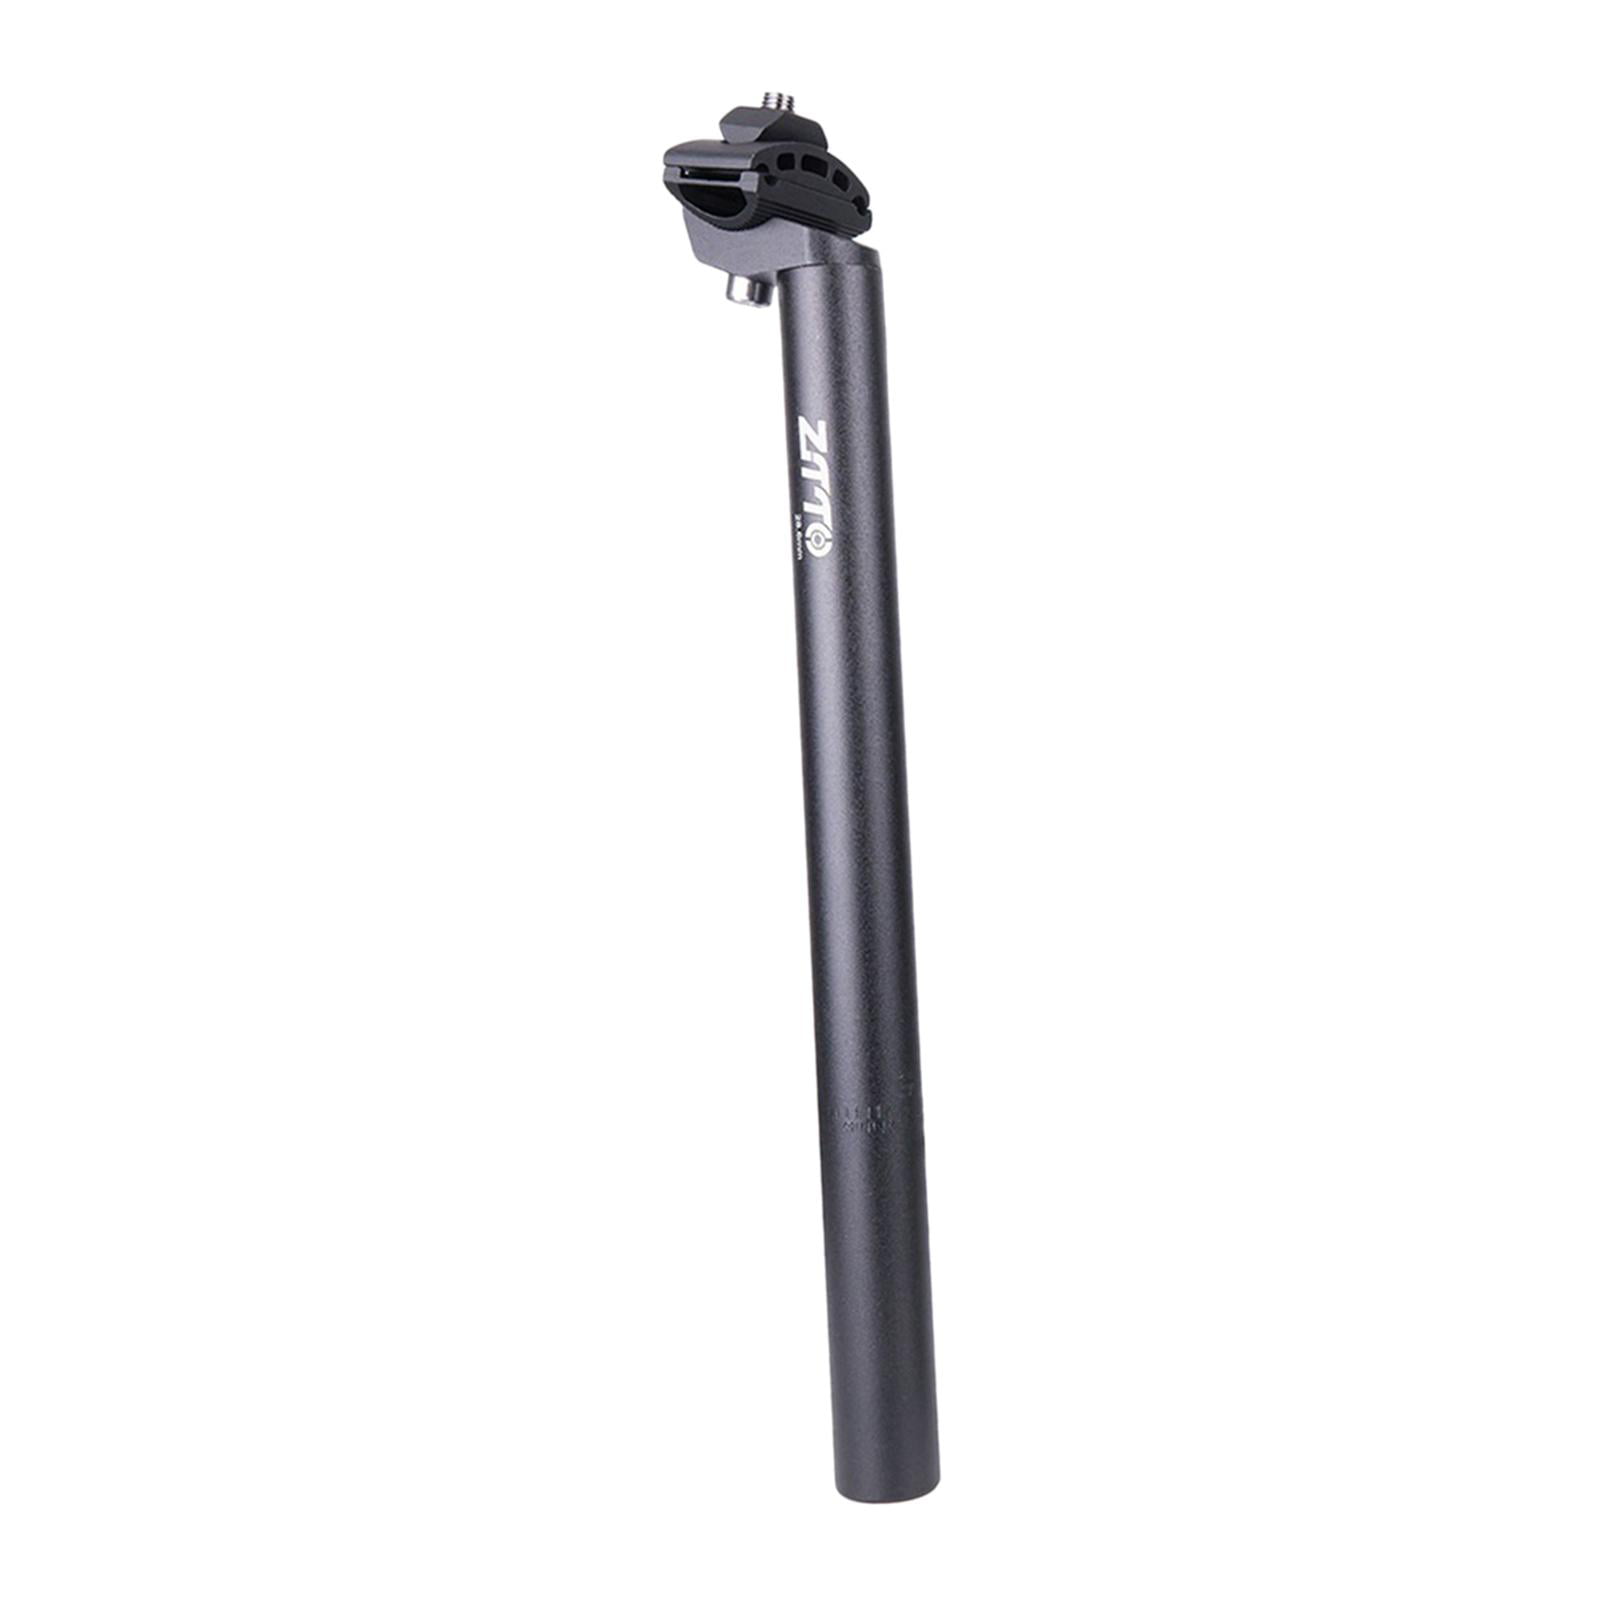 25.4 27.2 30.8 31.6mm Cycling Accessories Bike Seat Post  Seat Tube Seatpost 